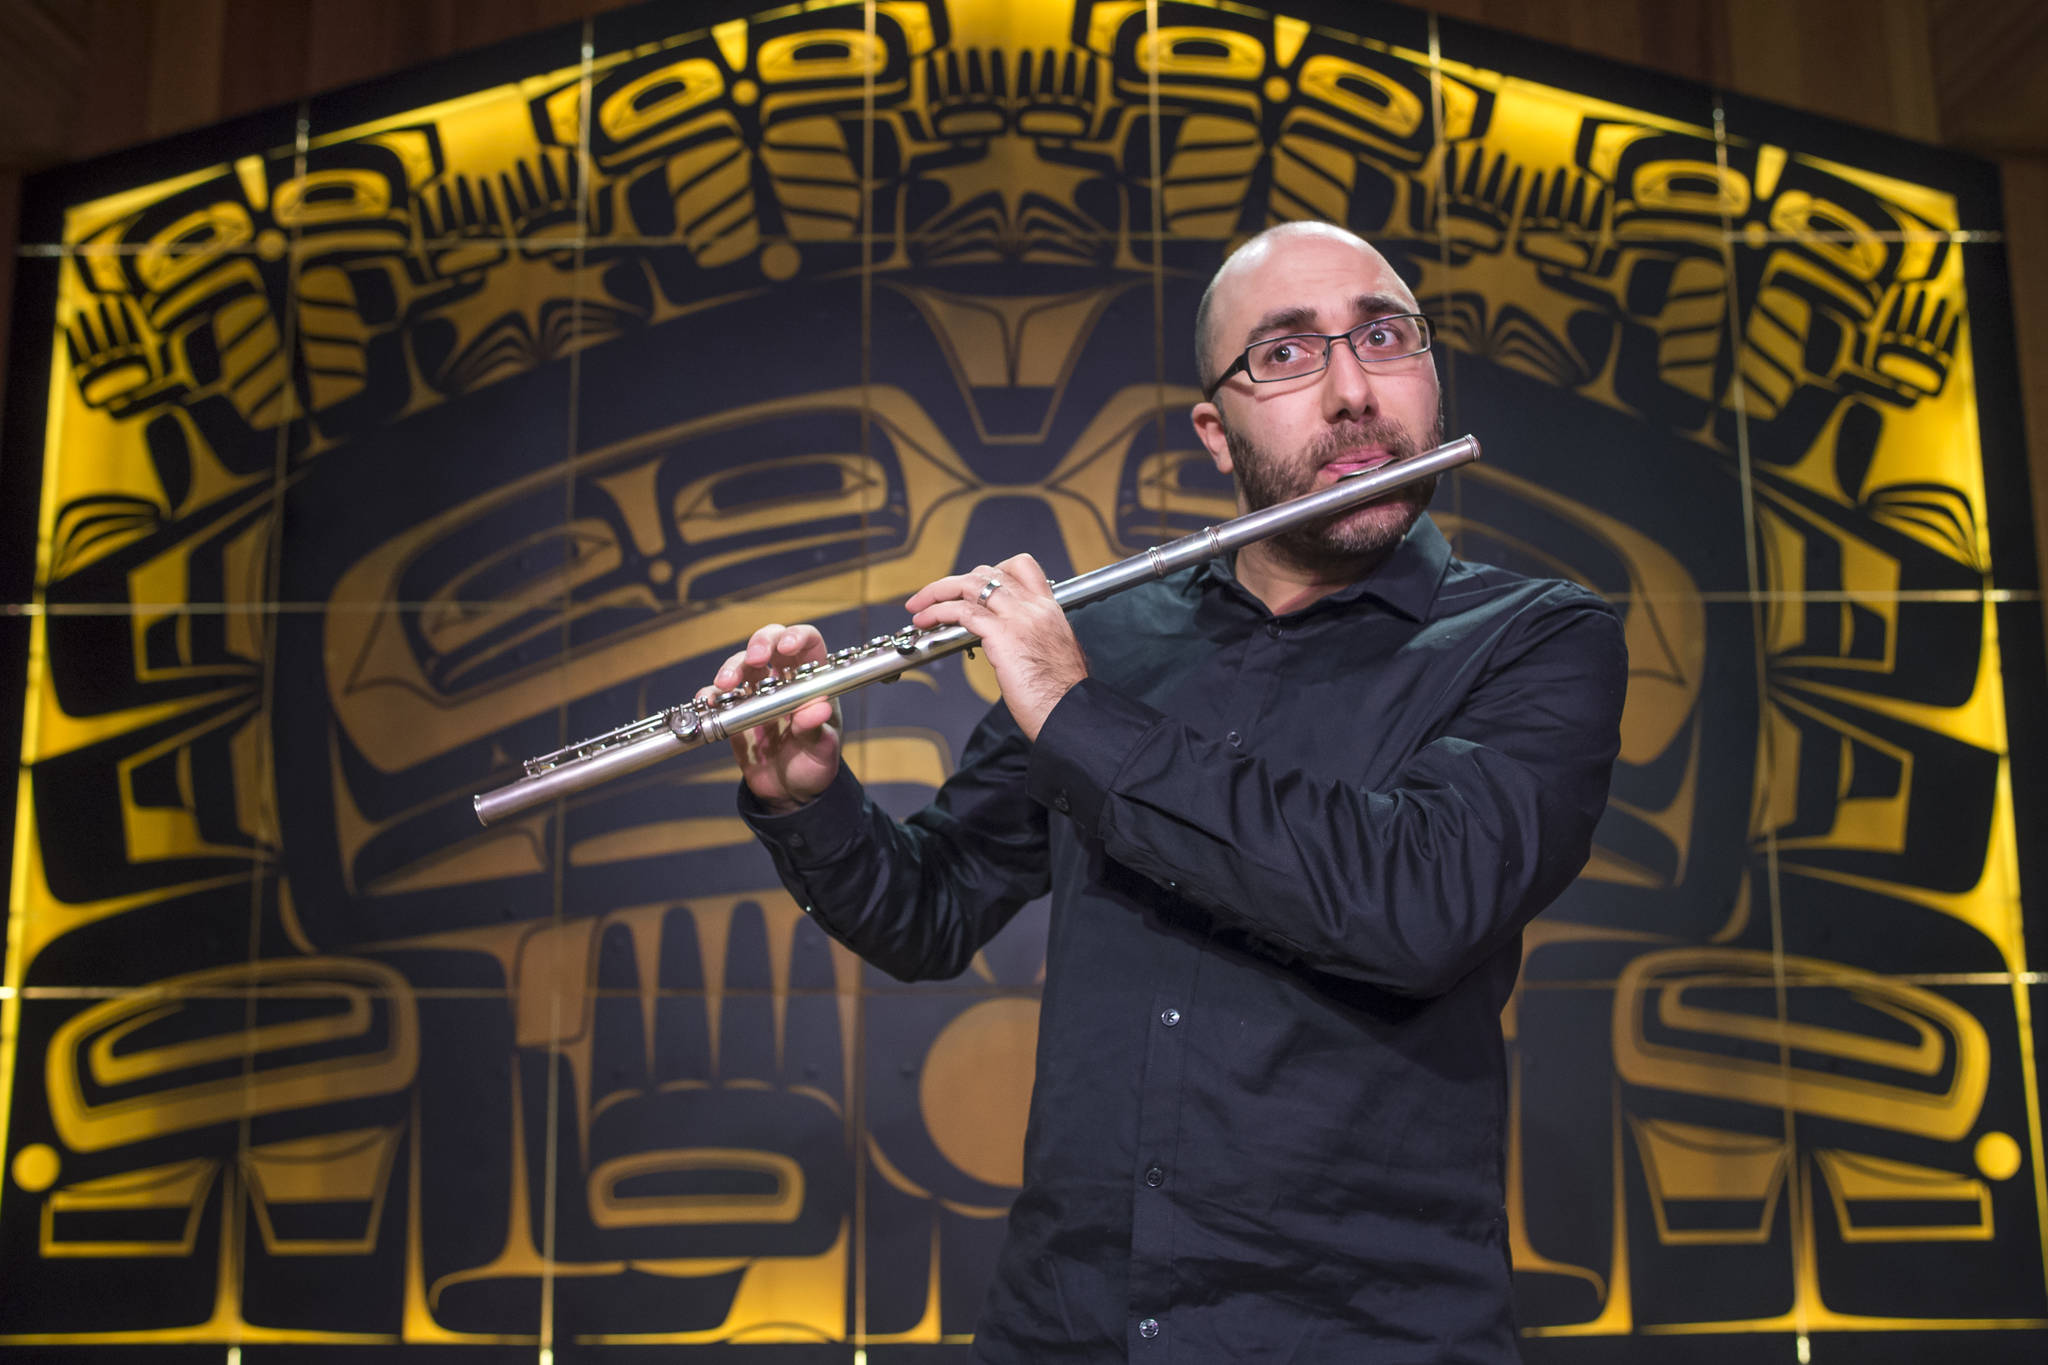 Armenian-American flutist Tigran Arakelyan, the Music Director of the Northwest Mahler Festival in Seattle and the Port Townsend Orchestra, performs a sound check in the Shuká Hít (Ancestors’ House) at the Walter Soboleff Center on Wednesday, Jan. 16, 2019. (Michael Penn | Juneau Empire)